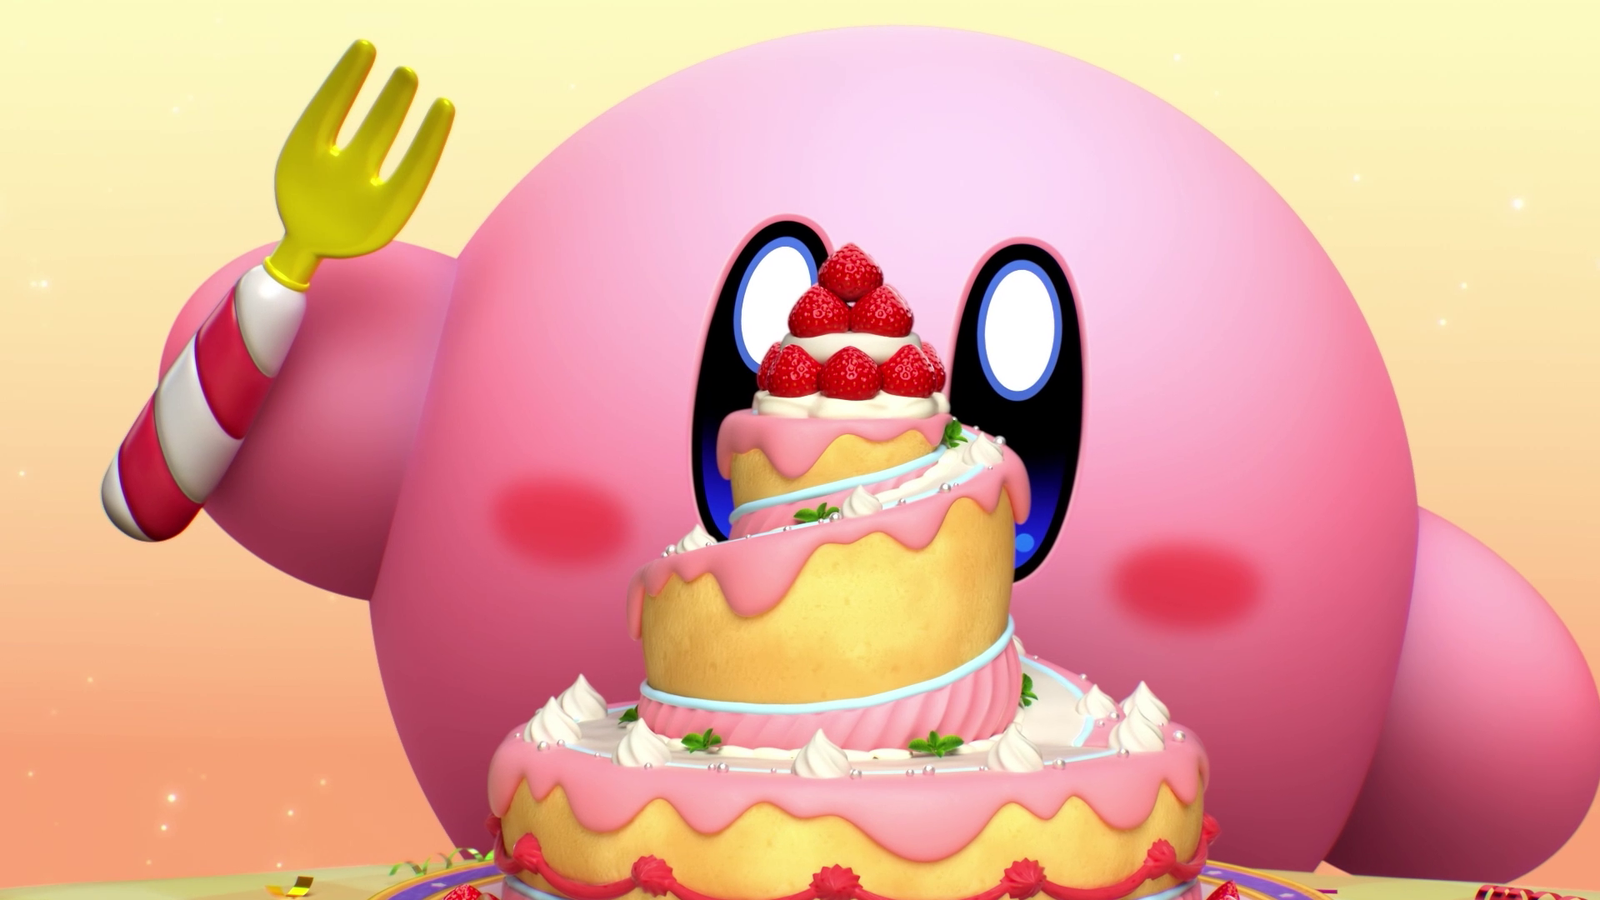 Let's Play Kirby's Dream Buffet 